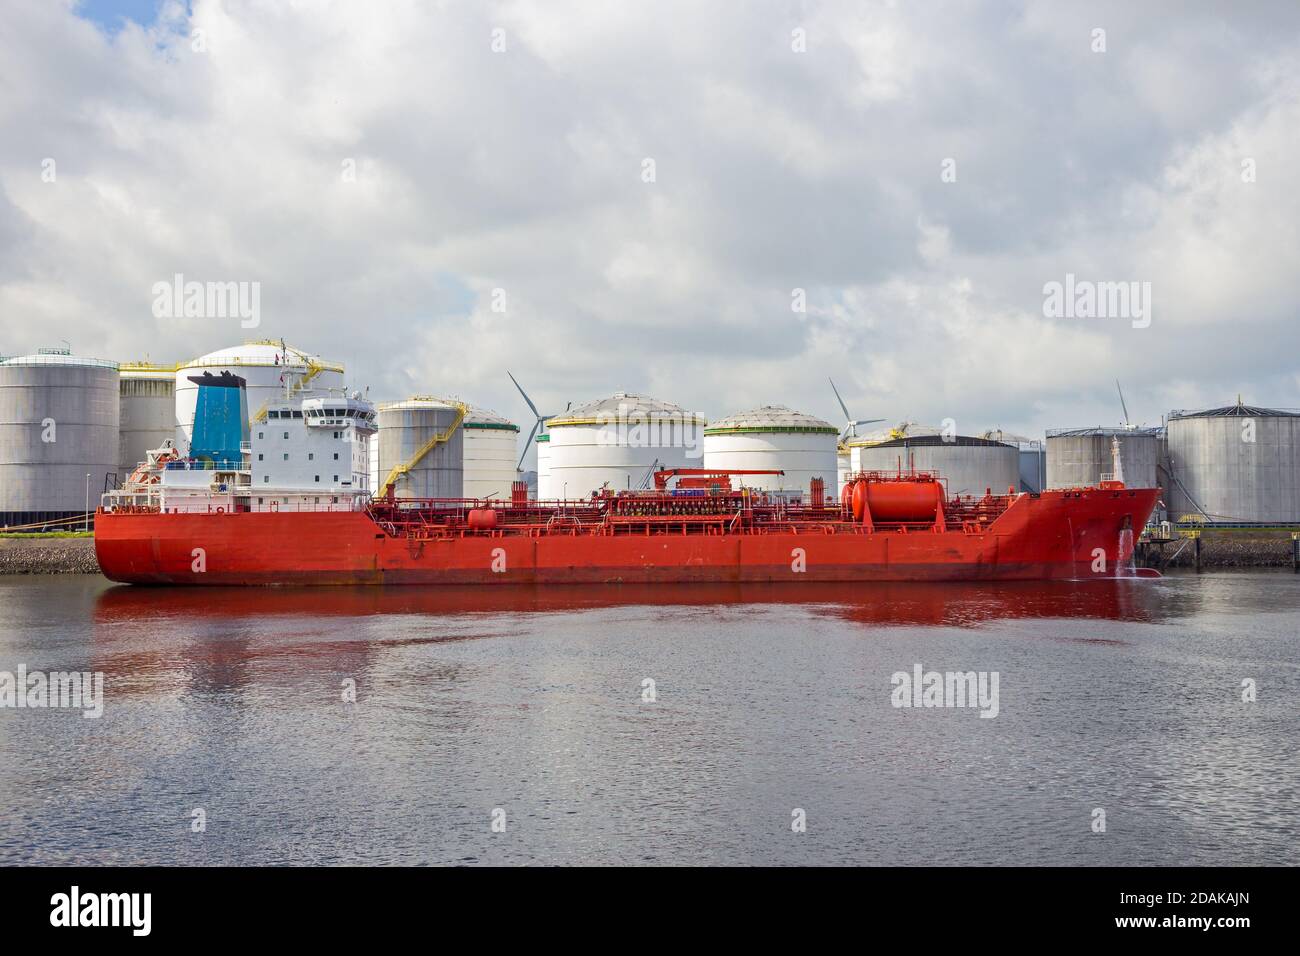 Red oil tanker moored at an silo's at an oil terminal in the Port of Rotterdam Stock Photo